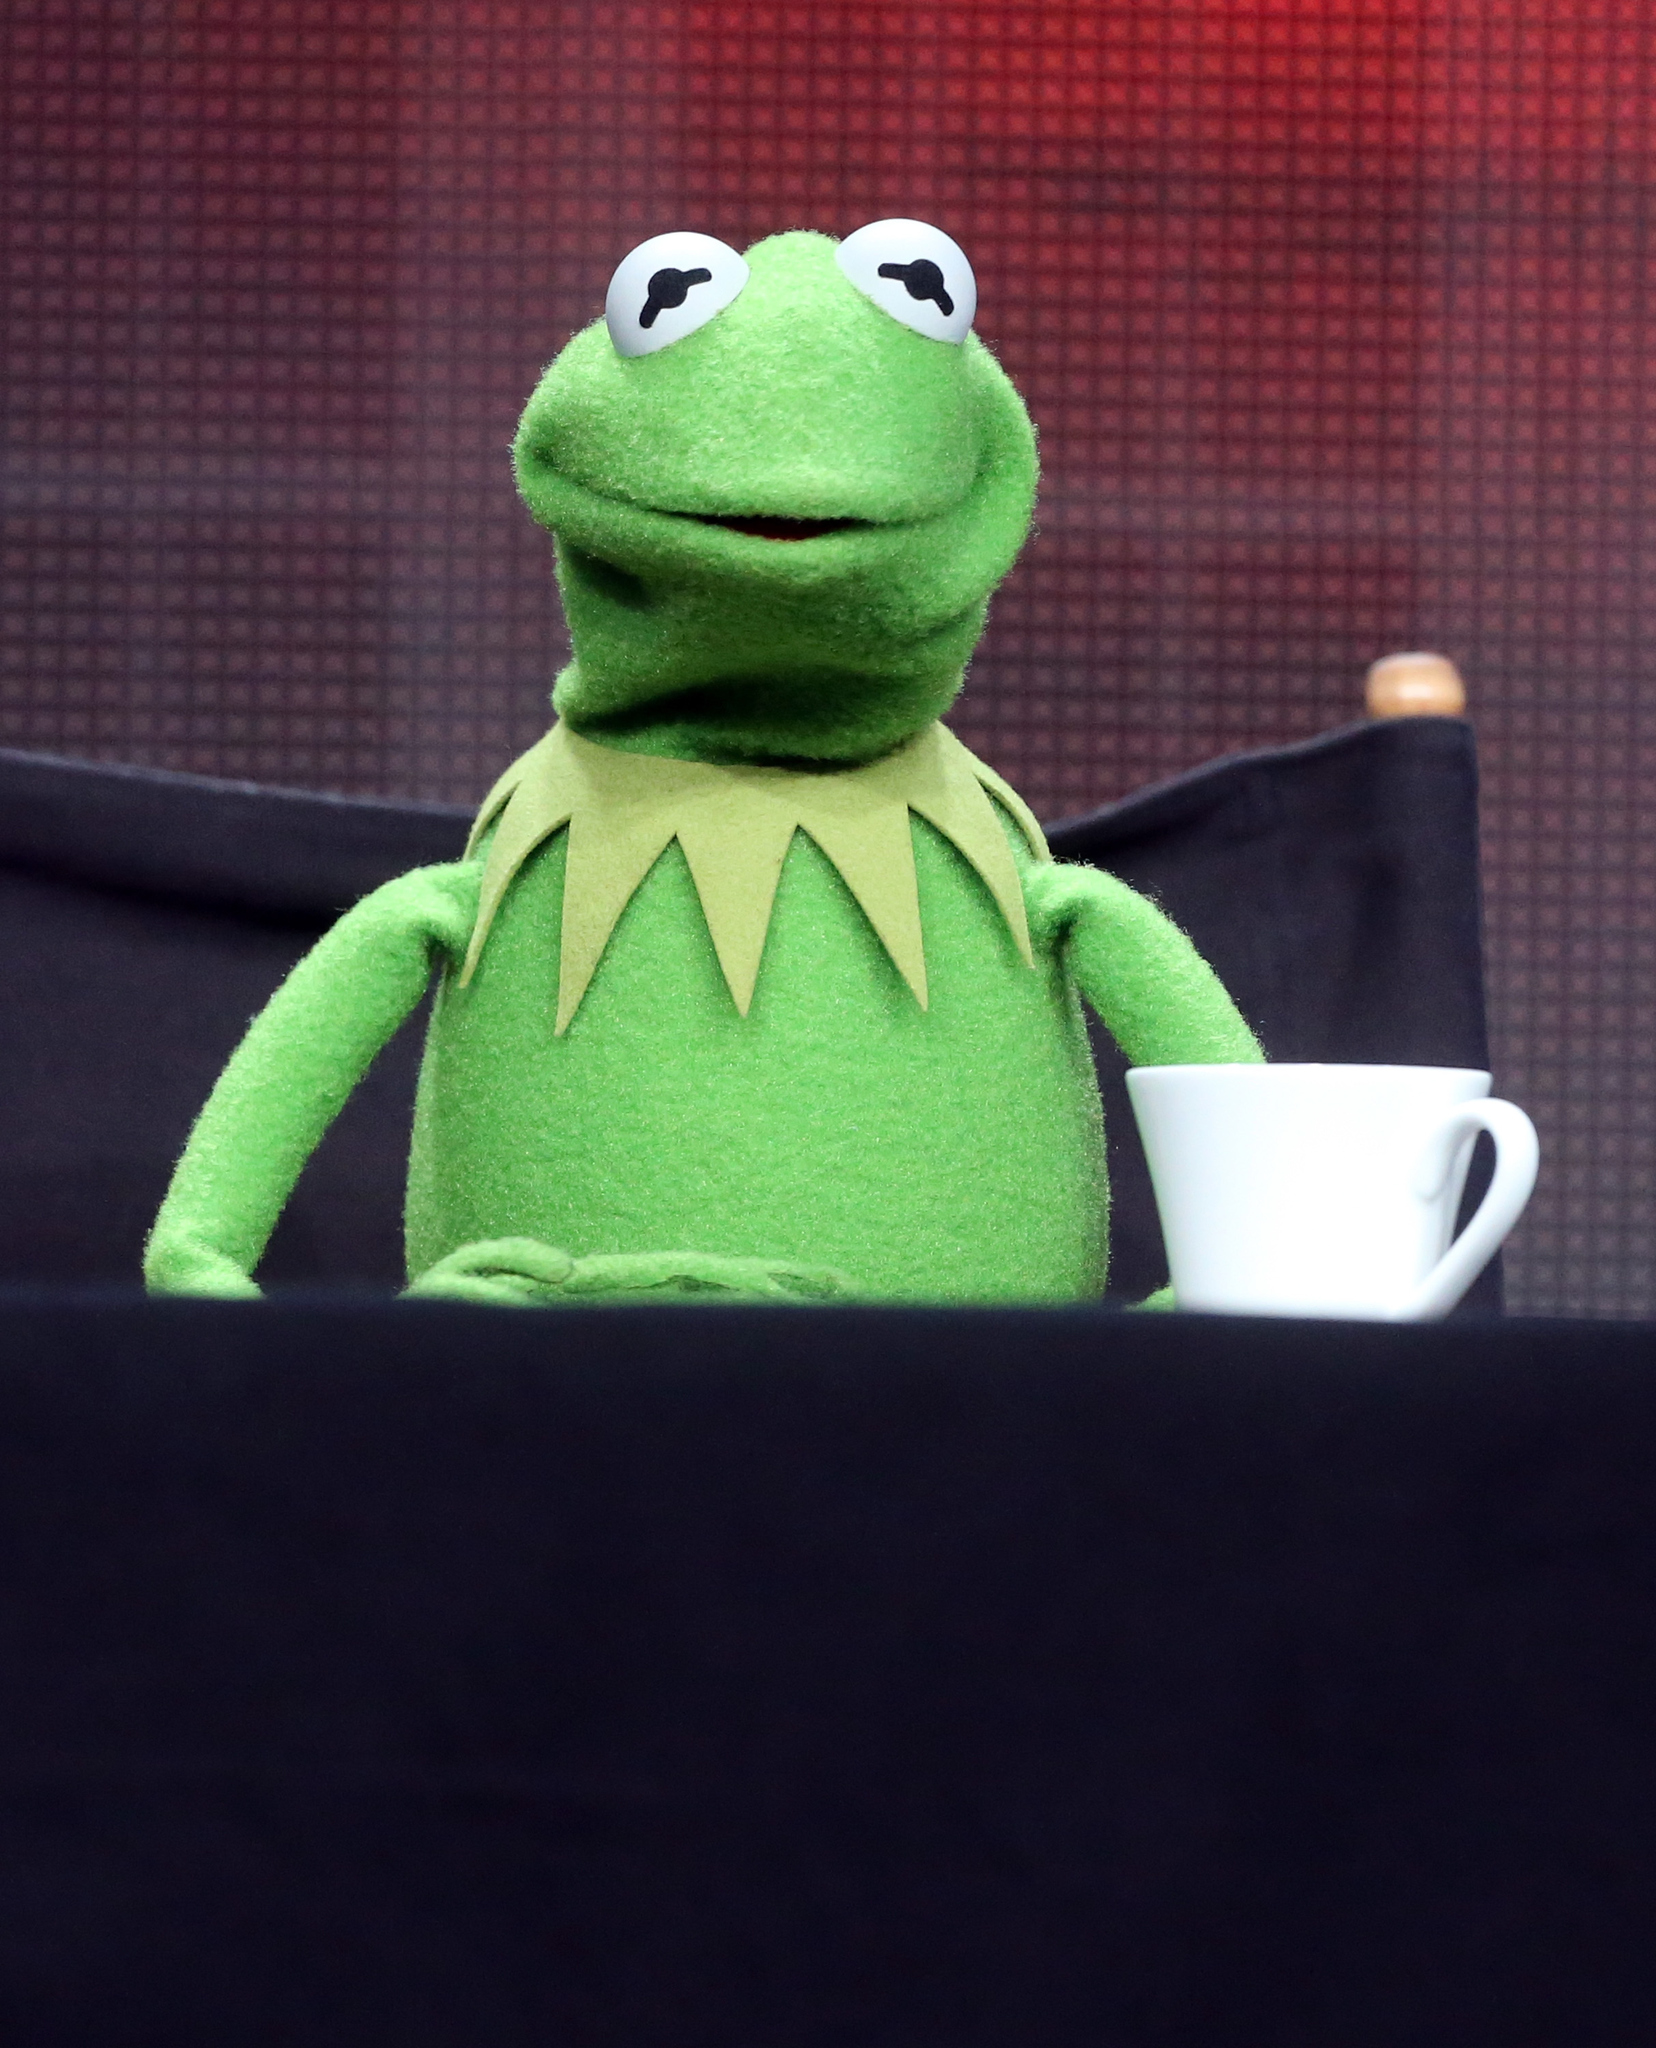 Kermit the Frog at event of The Muppets (2015)